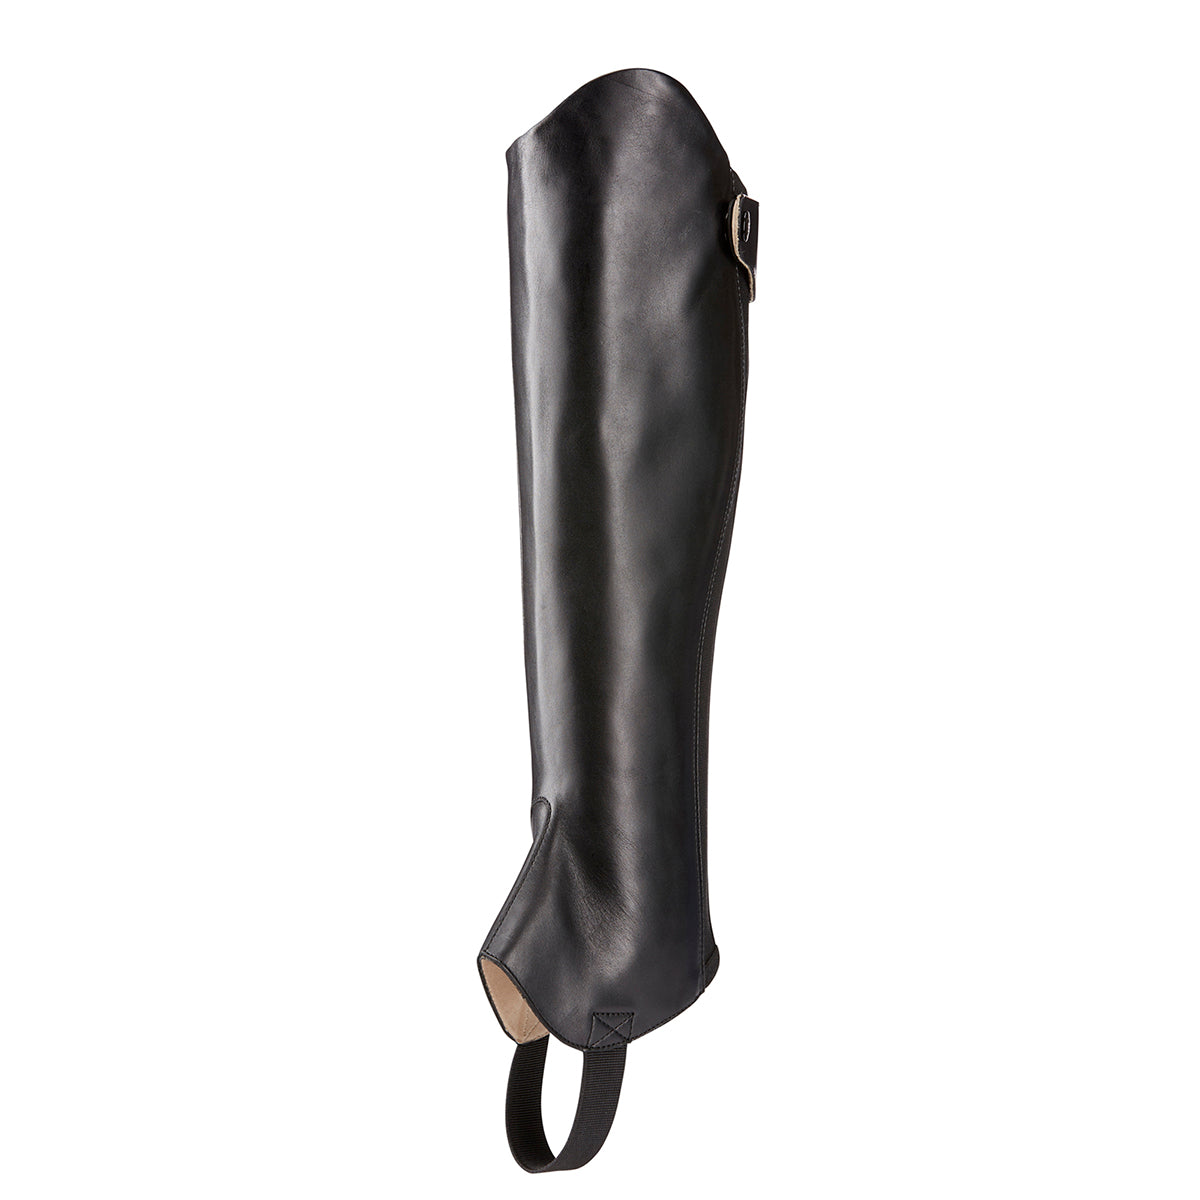 Unisex Ariat Kendron Half Chap in Black from the front